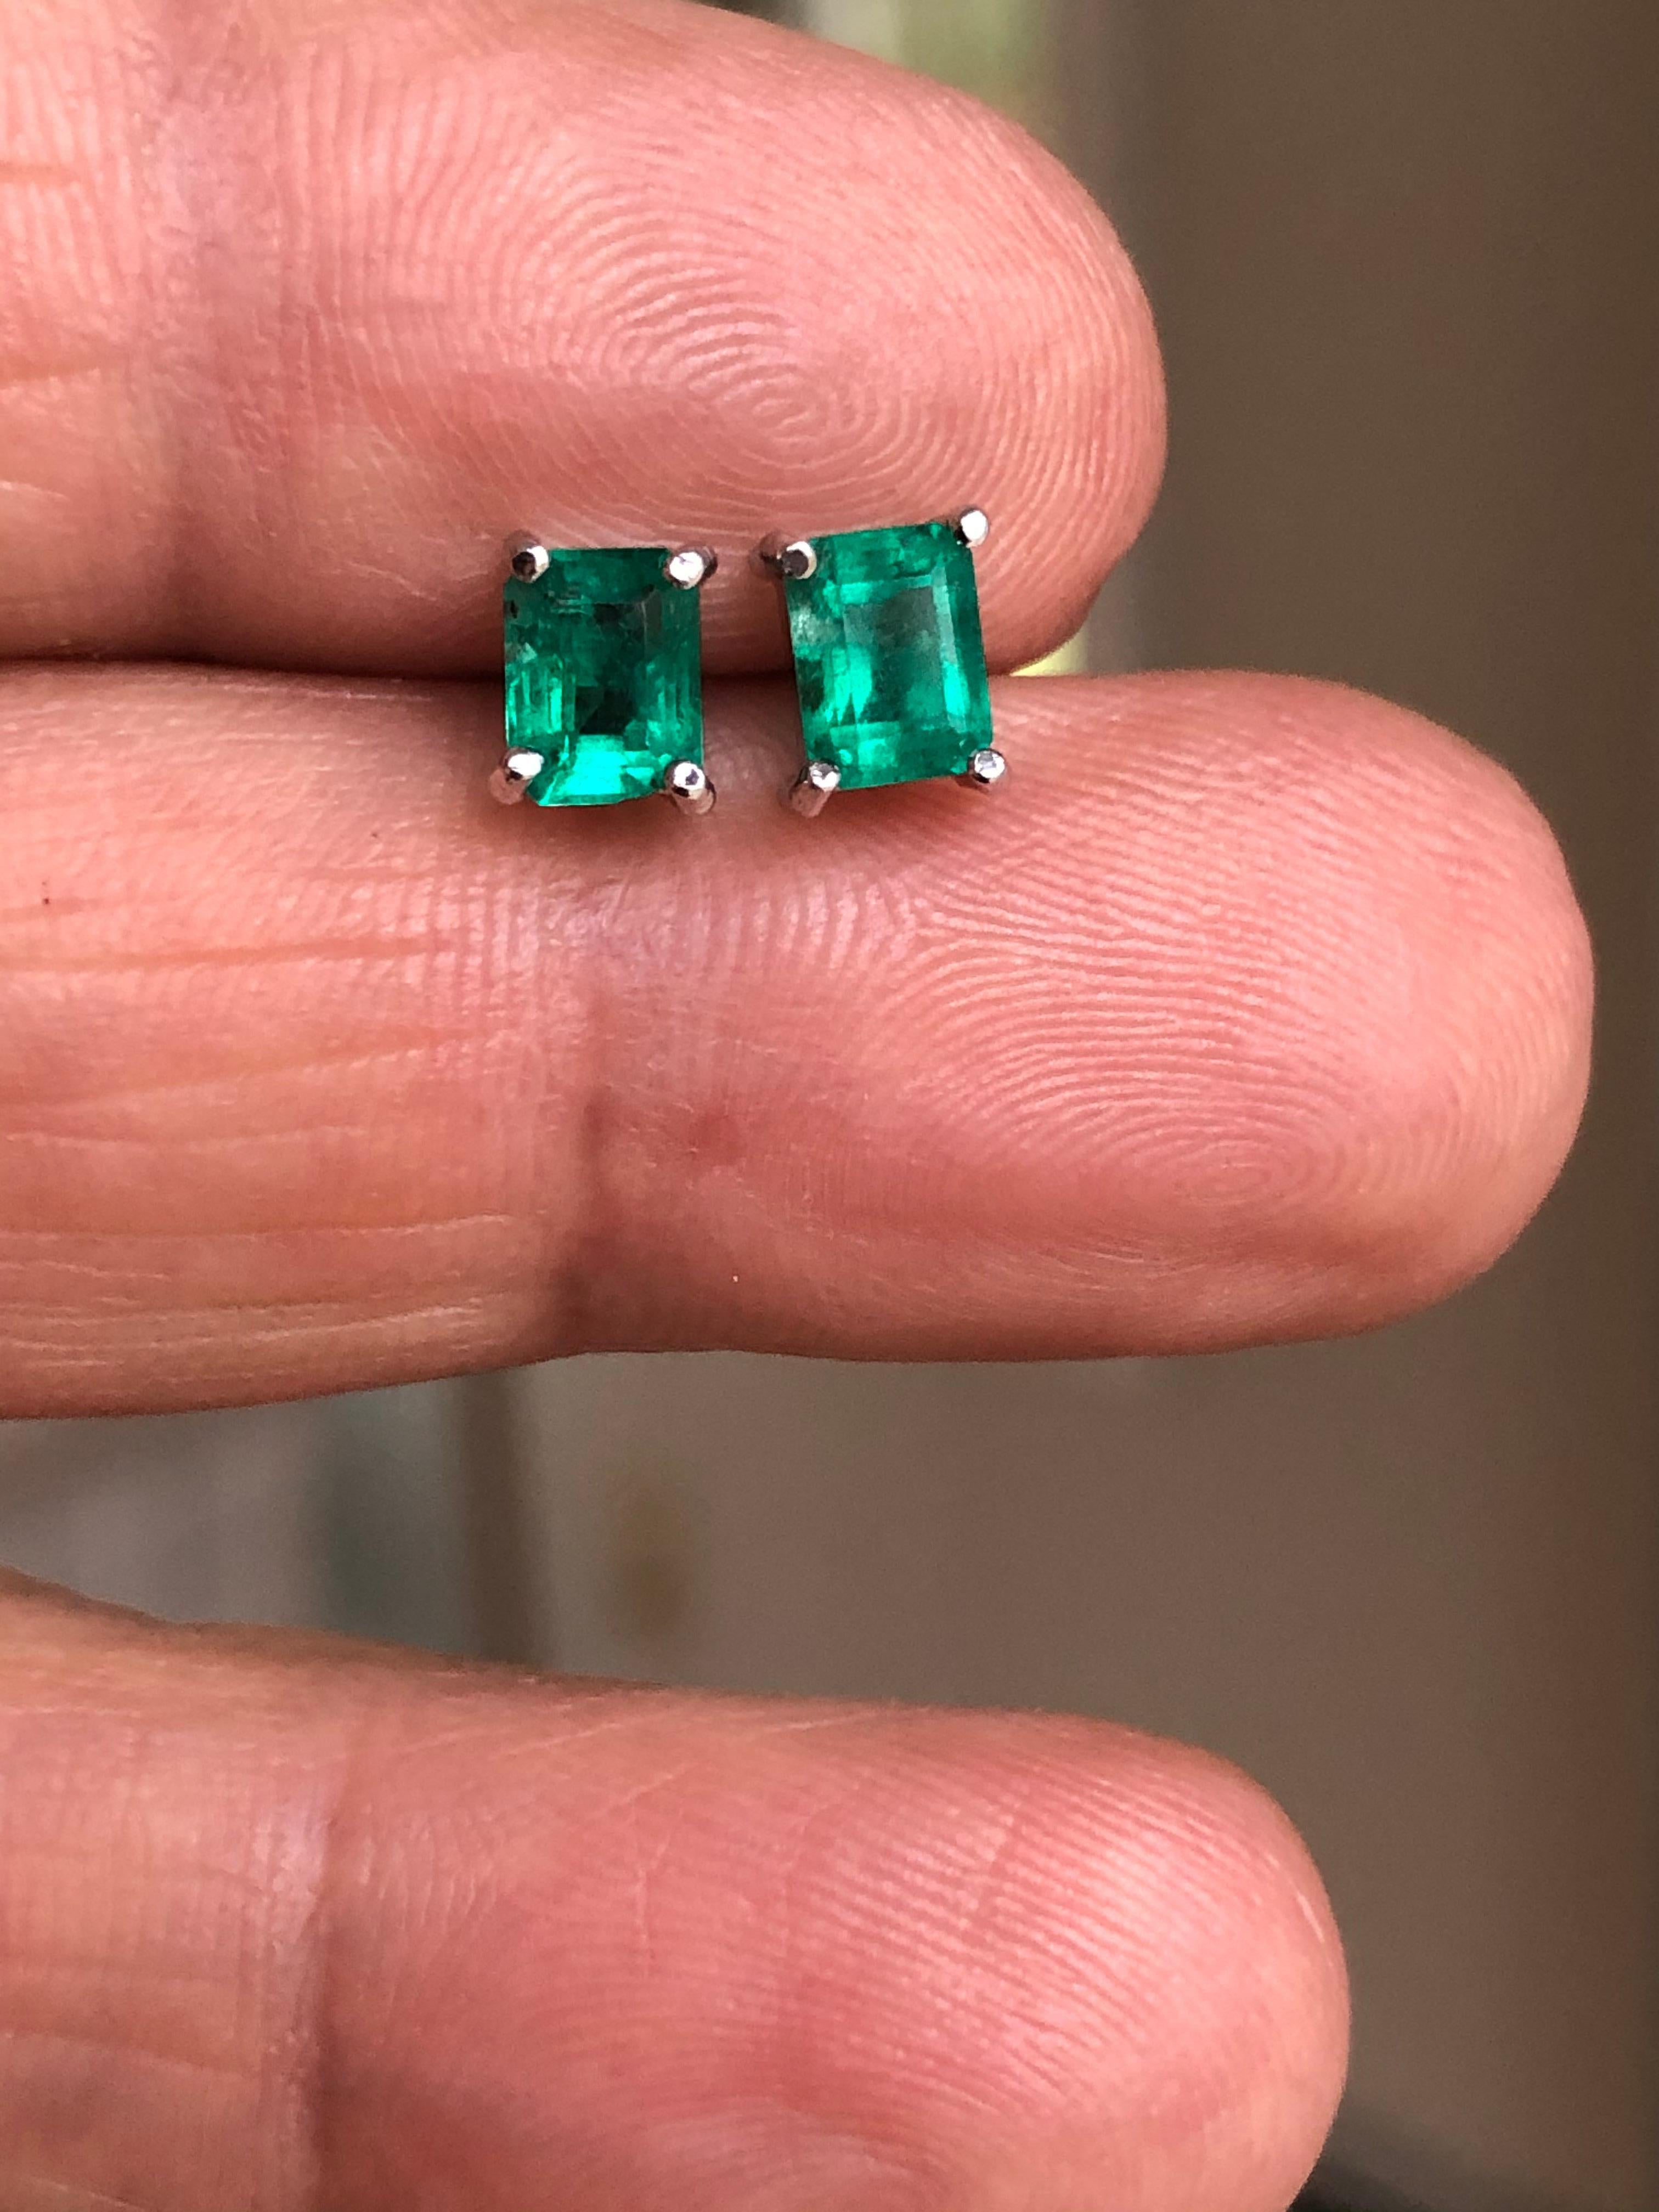 Stylish great for every day wear natural Colombian emerald stud earrings 18 Karat white gold, stunning intense green very vibrant color!!!
Primary Stones: 100% Natural Colombian Emeralds
Color/Clarity : FINE Medium Green Color/ Clarity, VS
Total